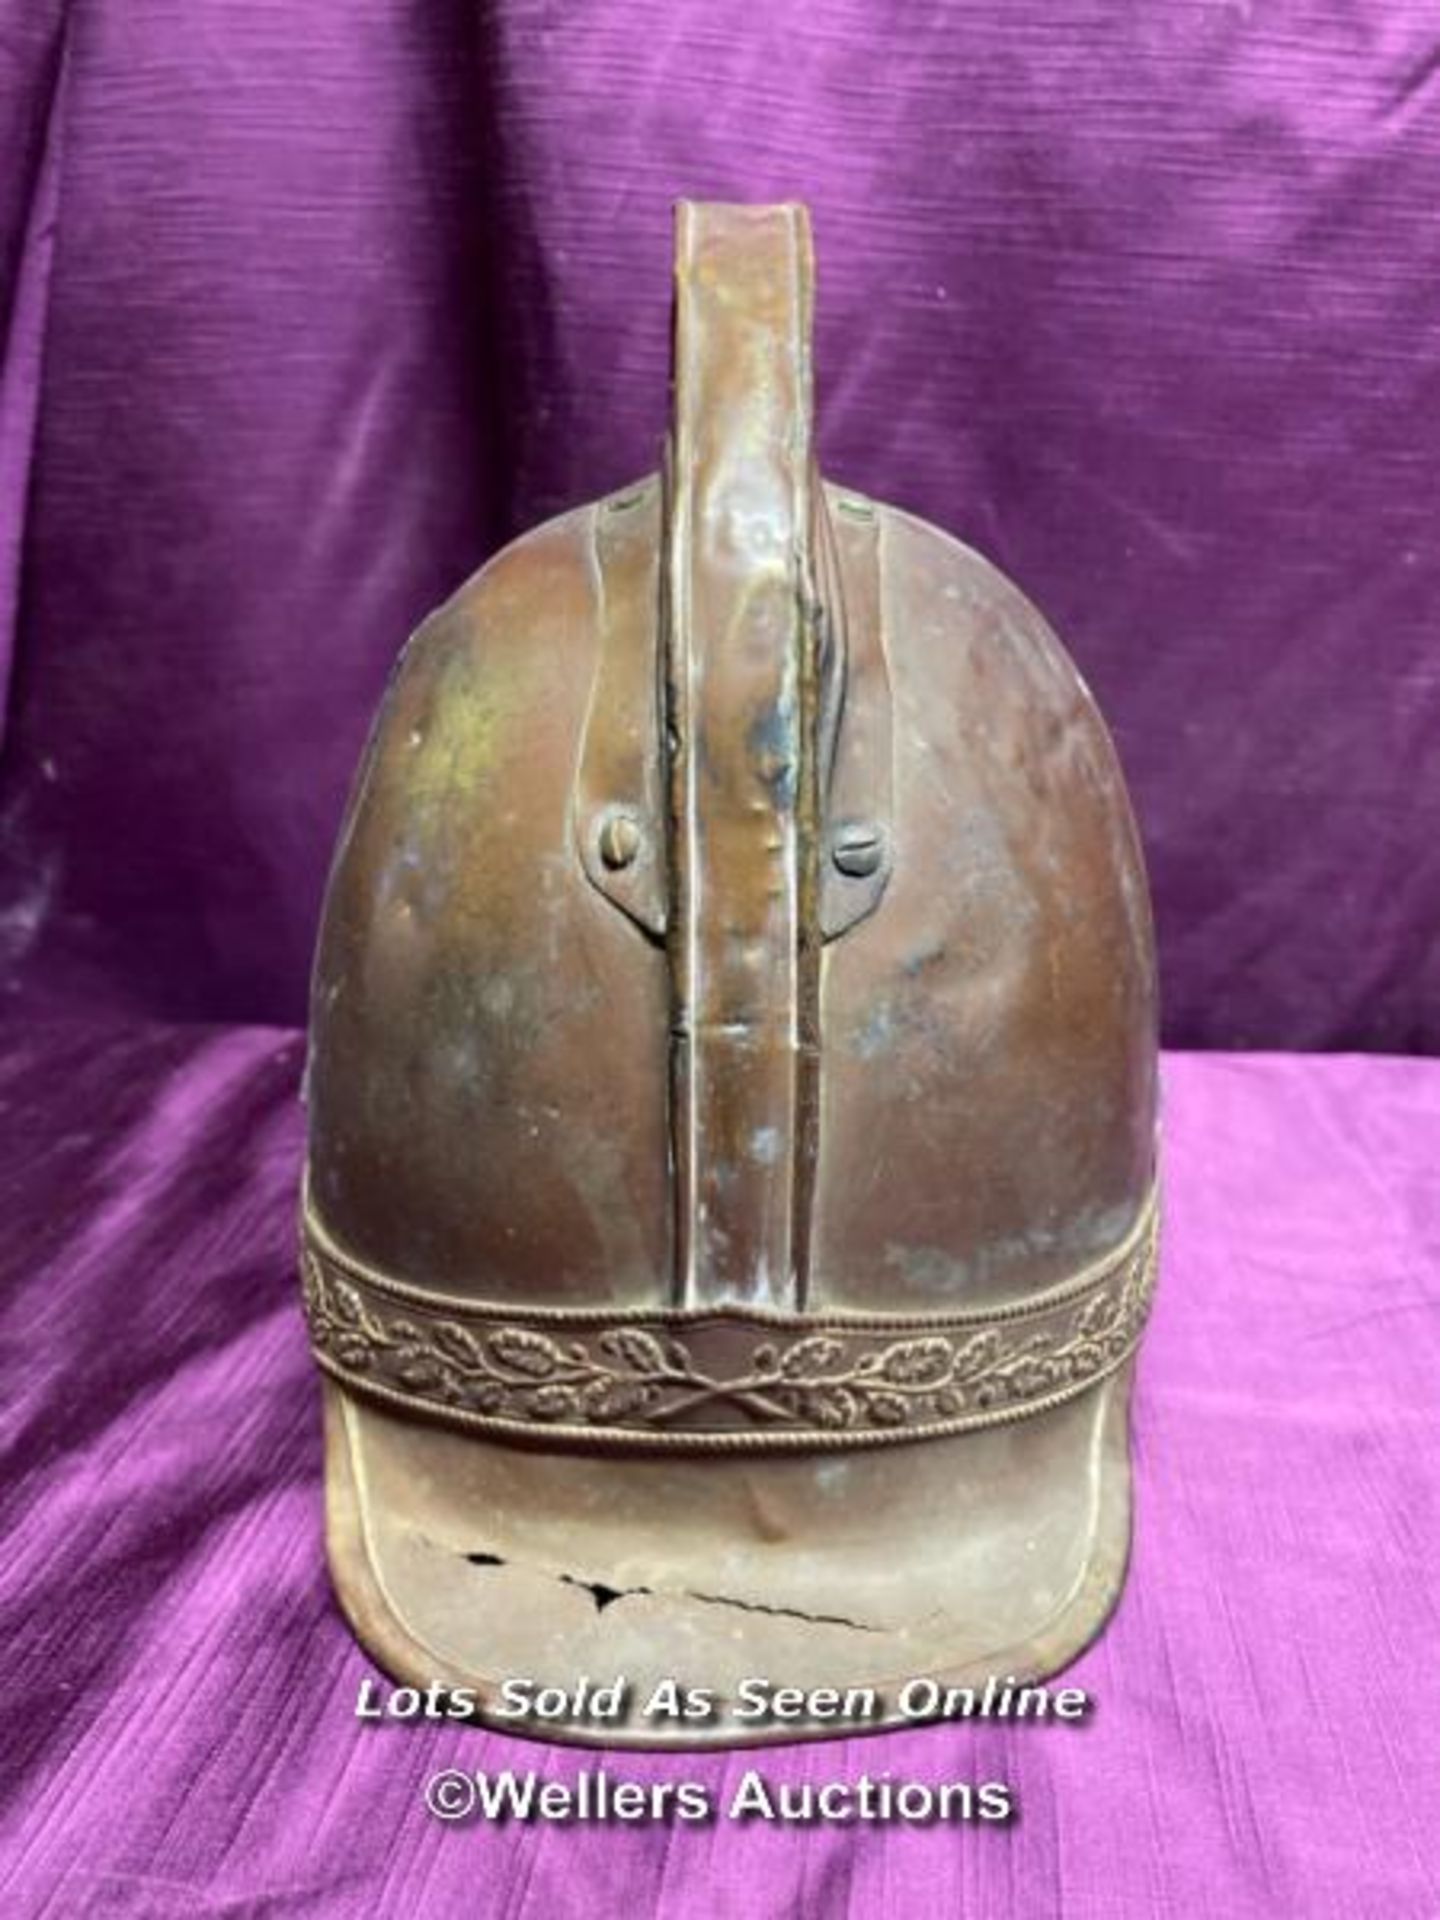 19TH CENTURY FRENCH SAPEURS AND POMPIERS HELMET, HEIGHT 24CM - Image 3 of 5